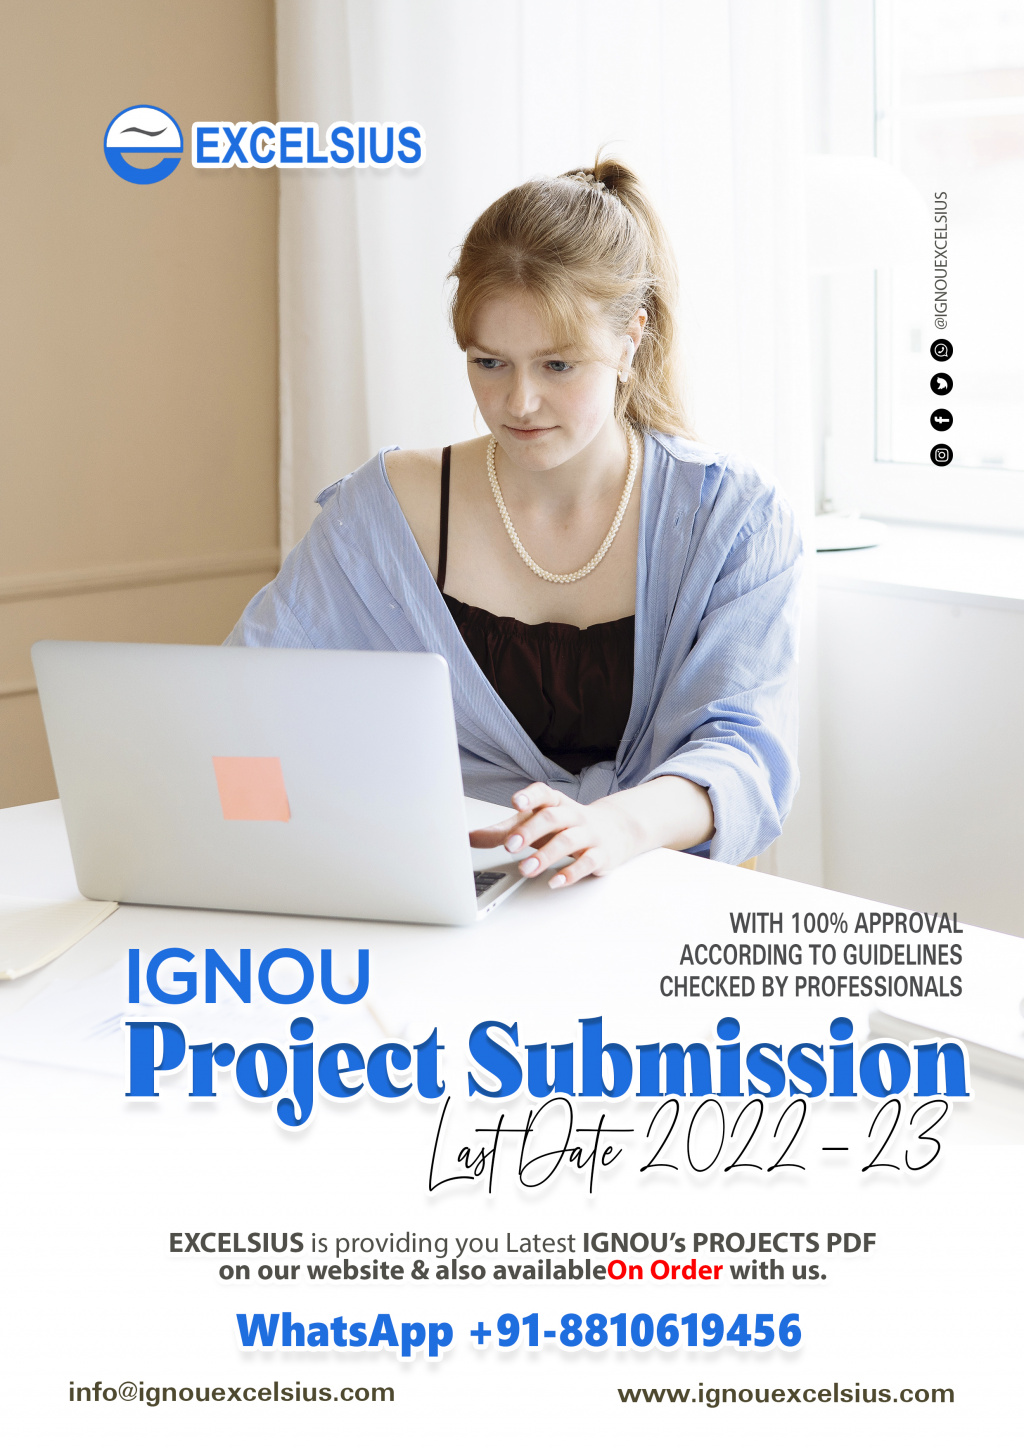 IGNOU Project Submission Last Date 2022-23